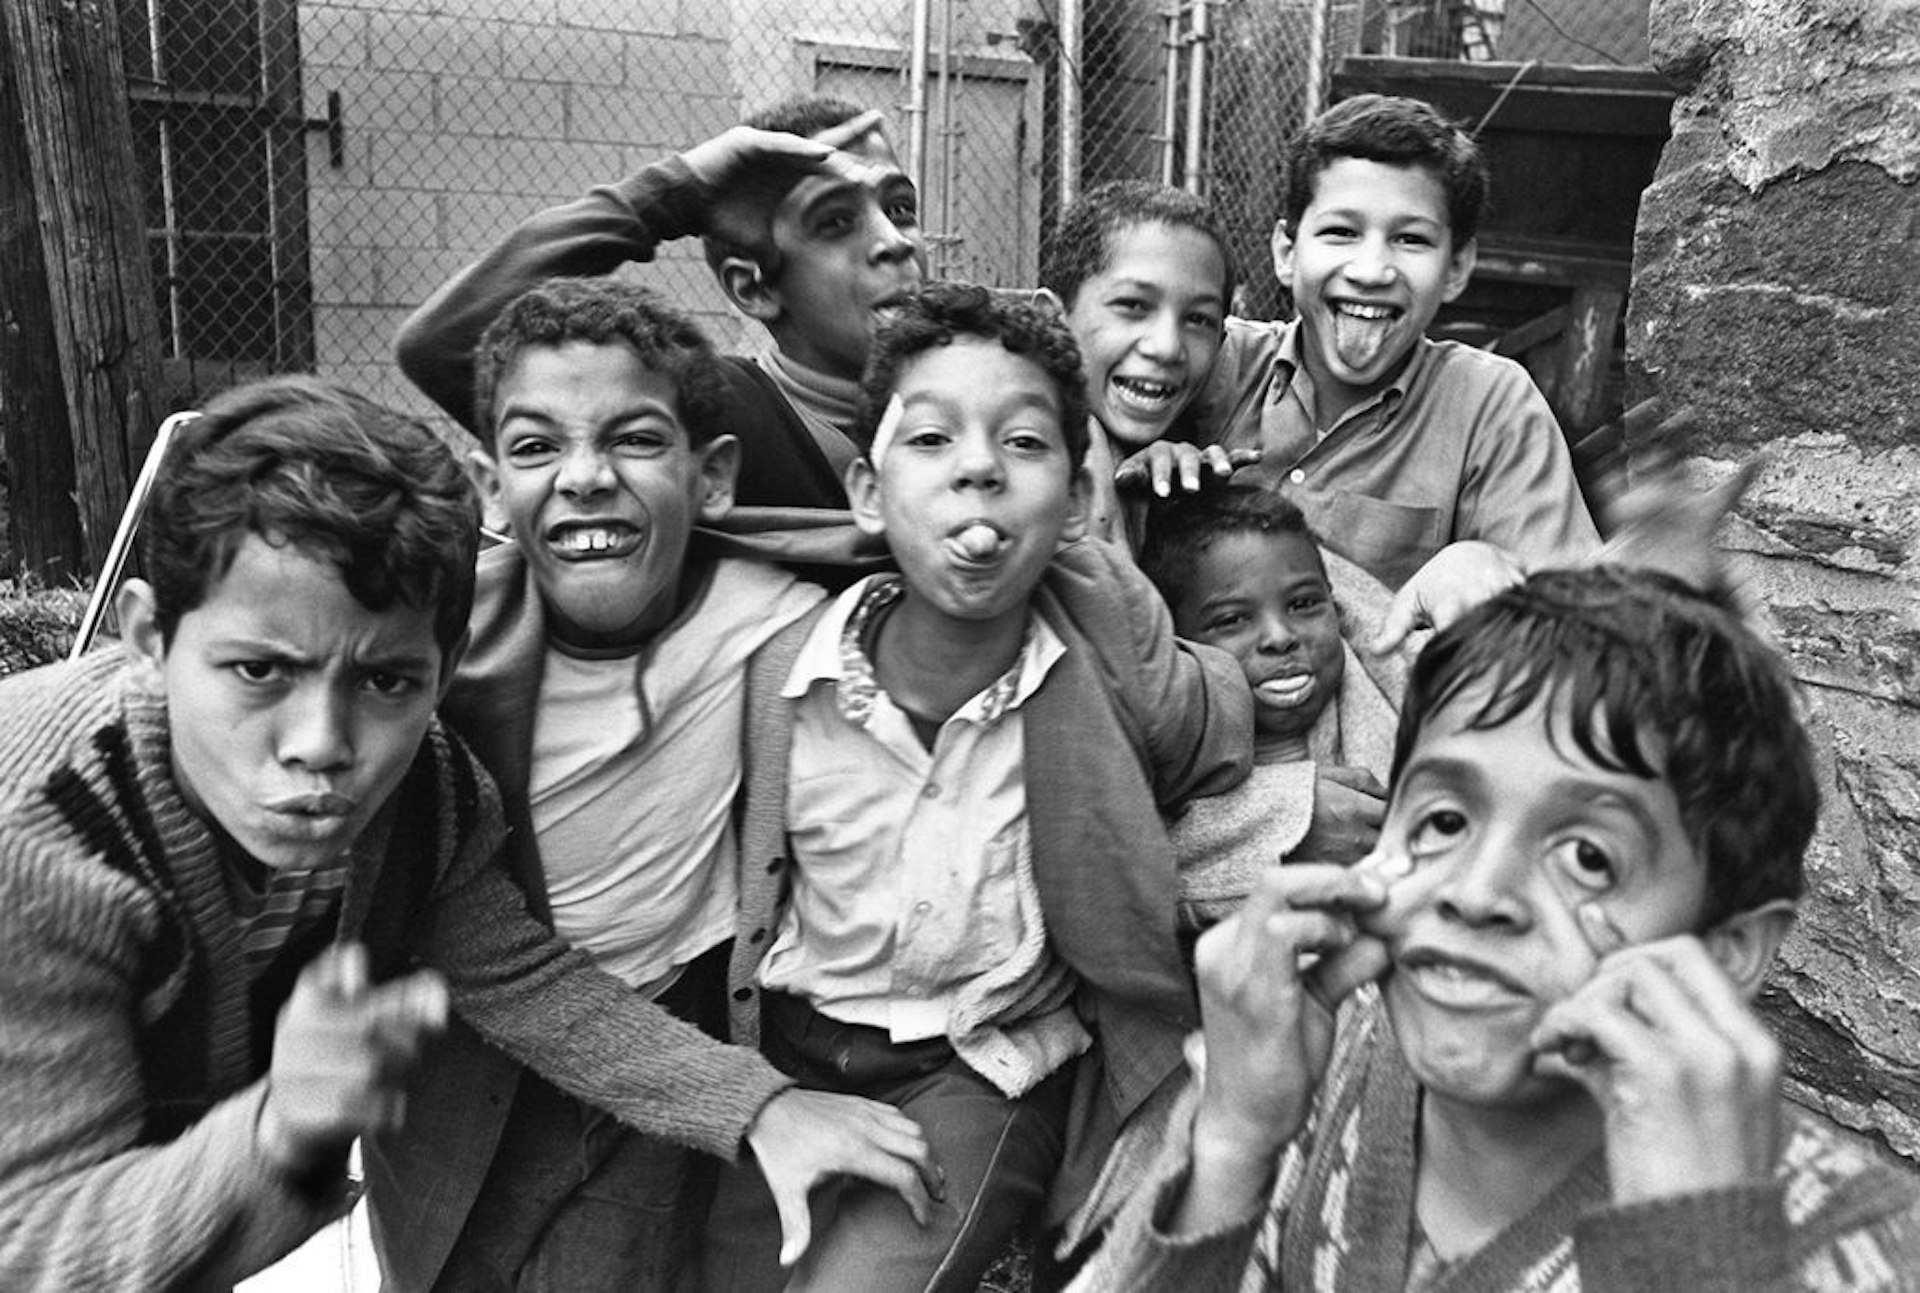 Photos of Puerto Rican life in New York in the ‘60s and ‘70s